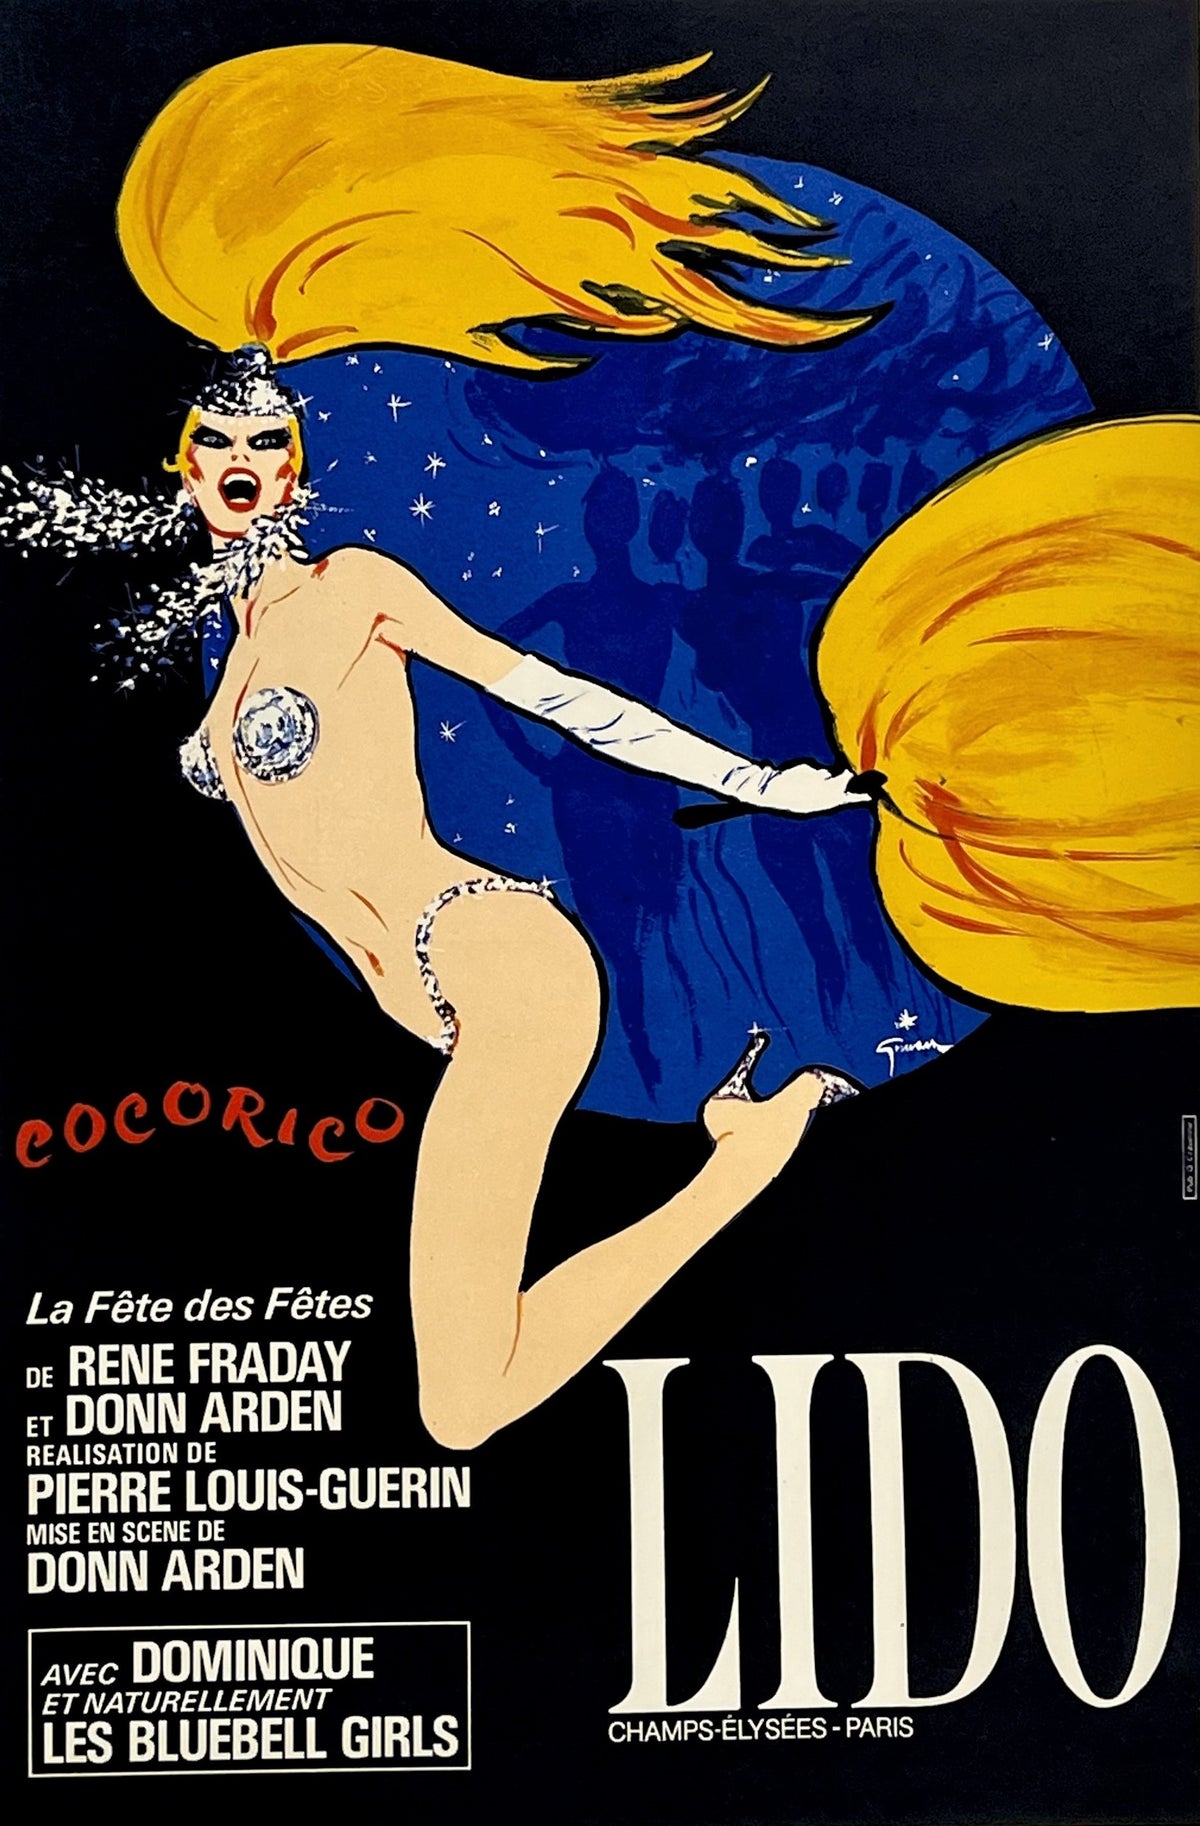 Lido by Rene Gruau - Authentic Vintage Poster